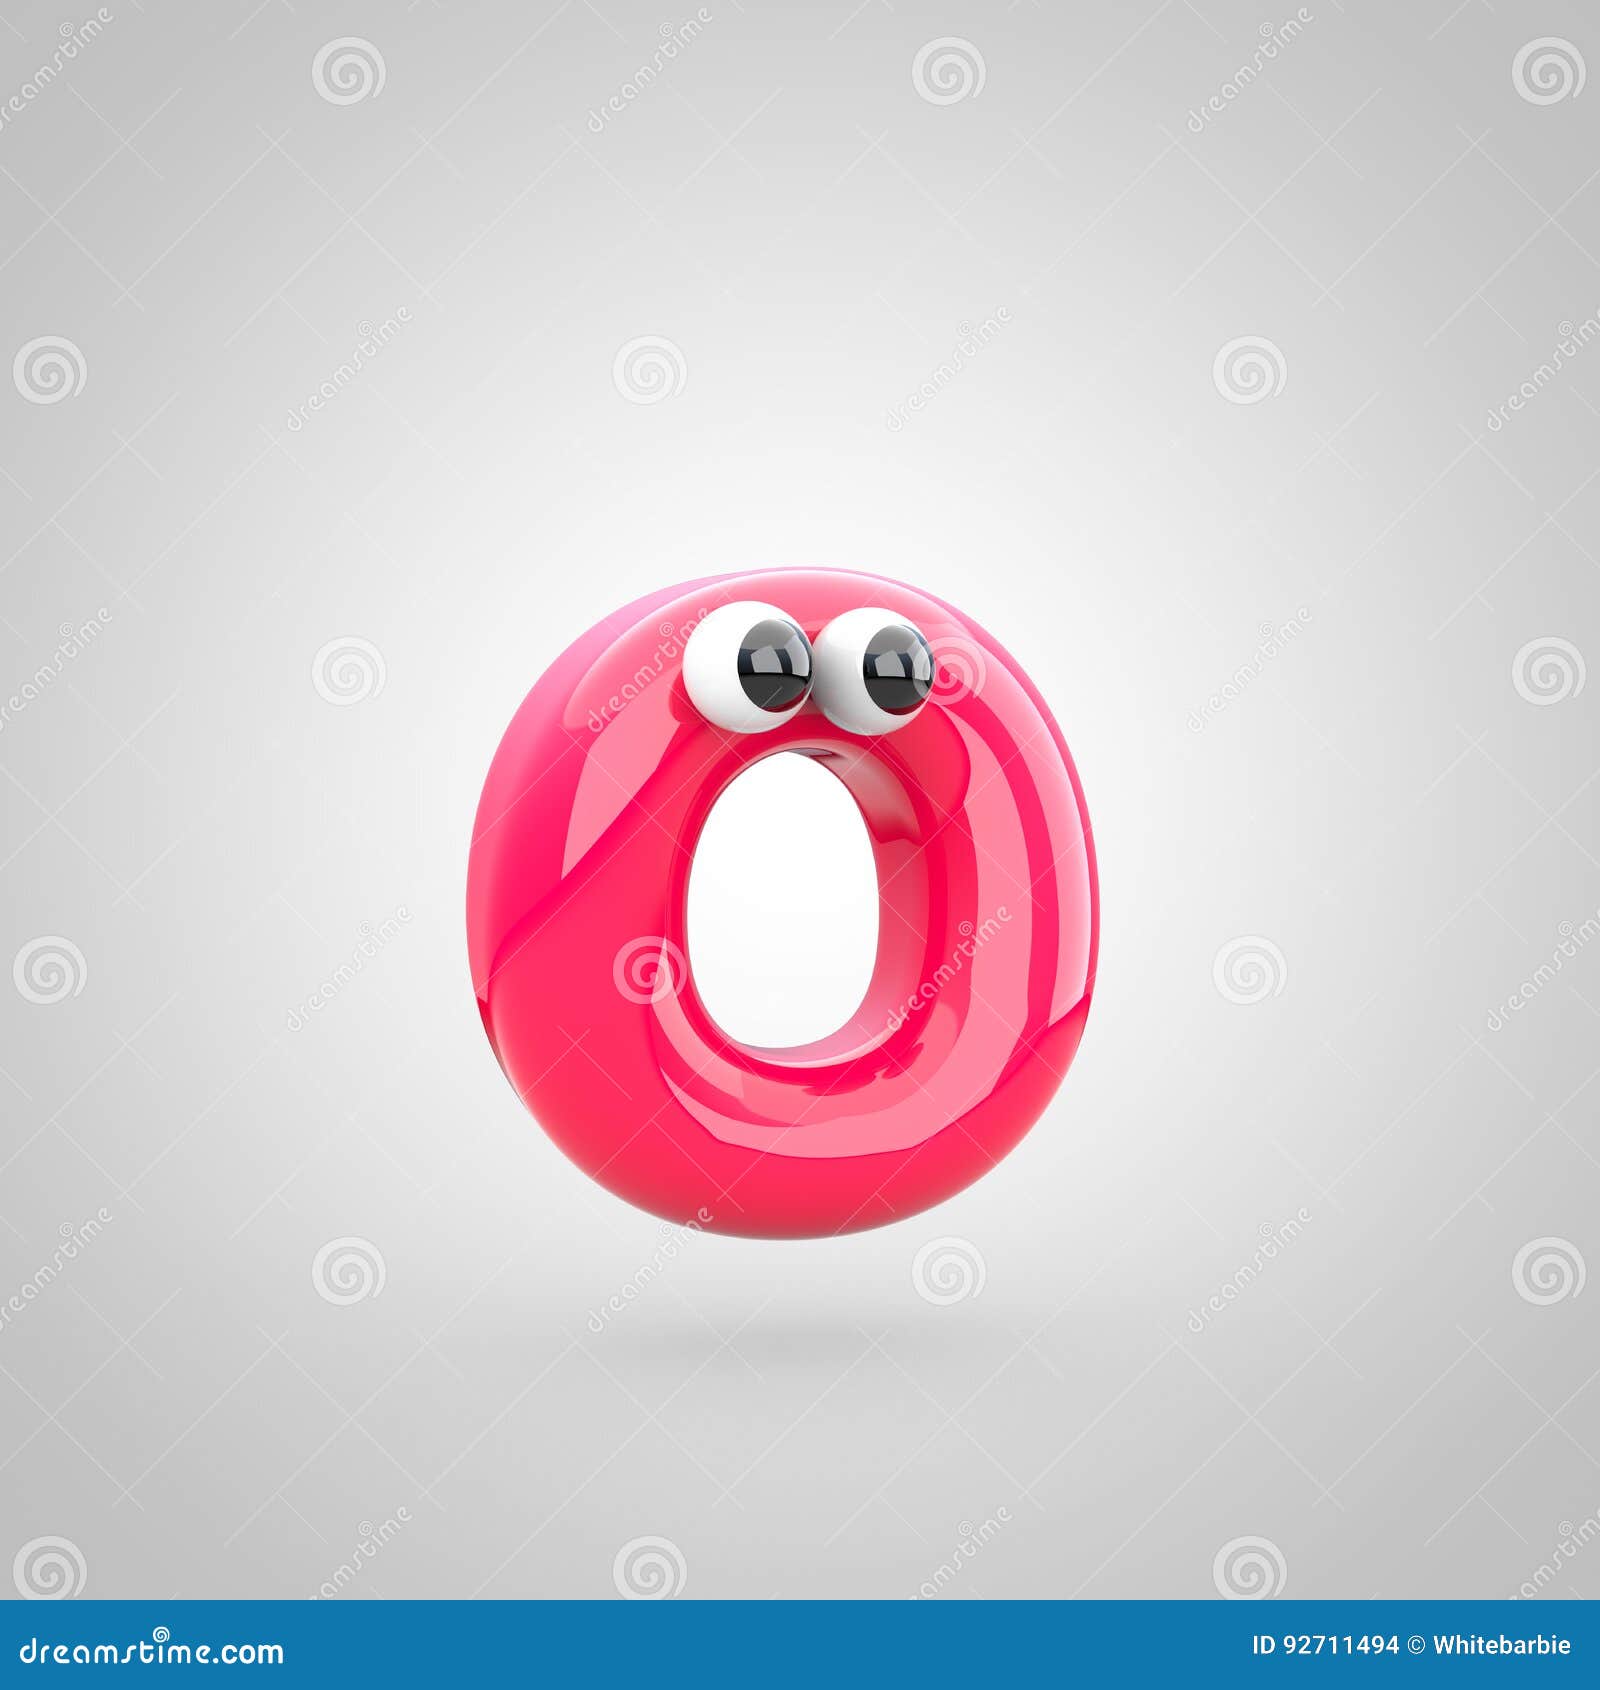 Funny Pink Letter O Lowercase With Eyes Stock Illustration